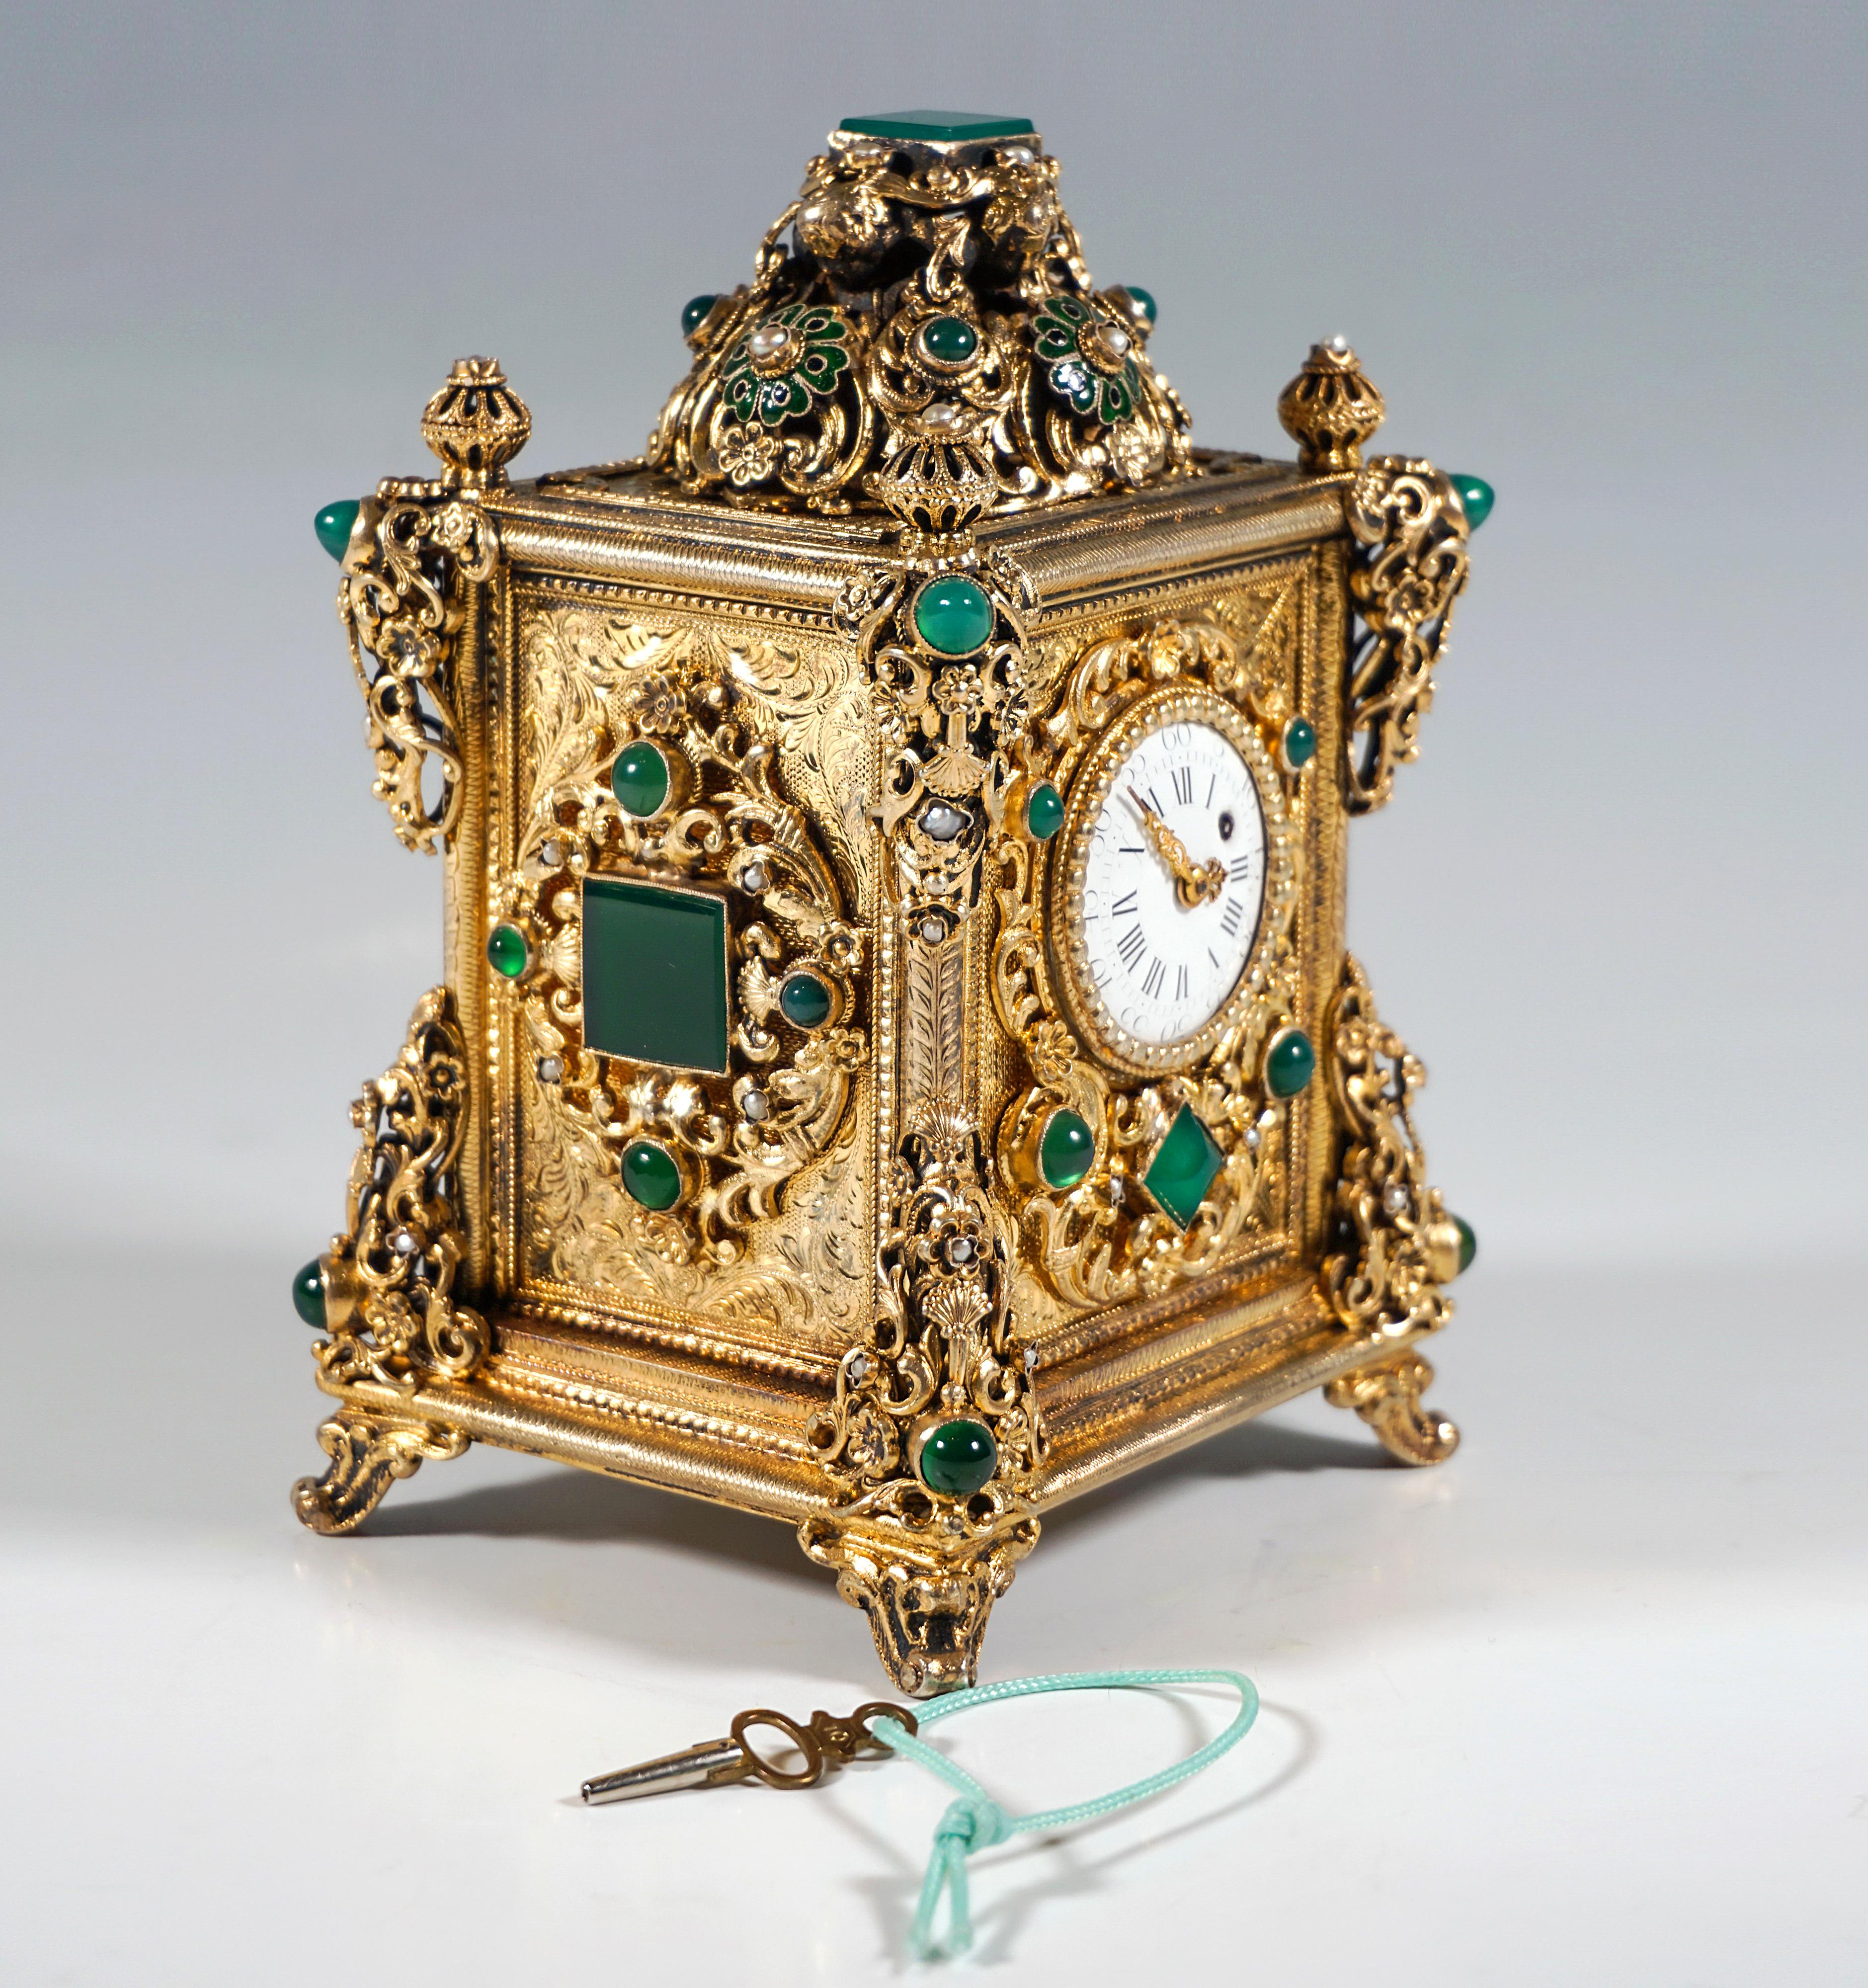 Other Viennese Gilt Silver Splendid Table Clock With Green Chalcedony Trimming, C 1880